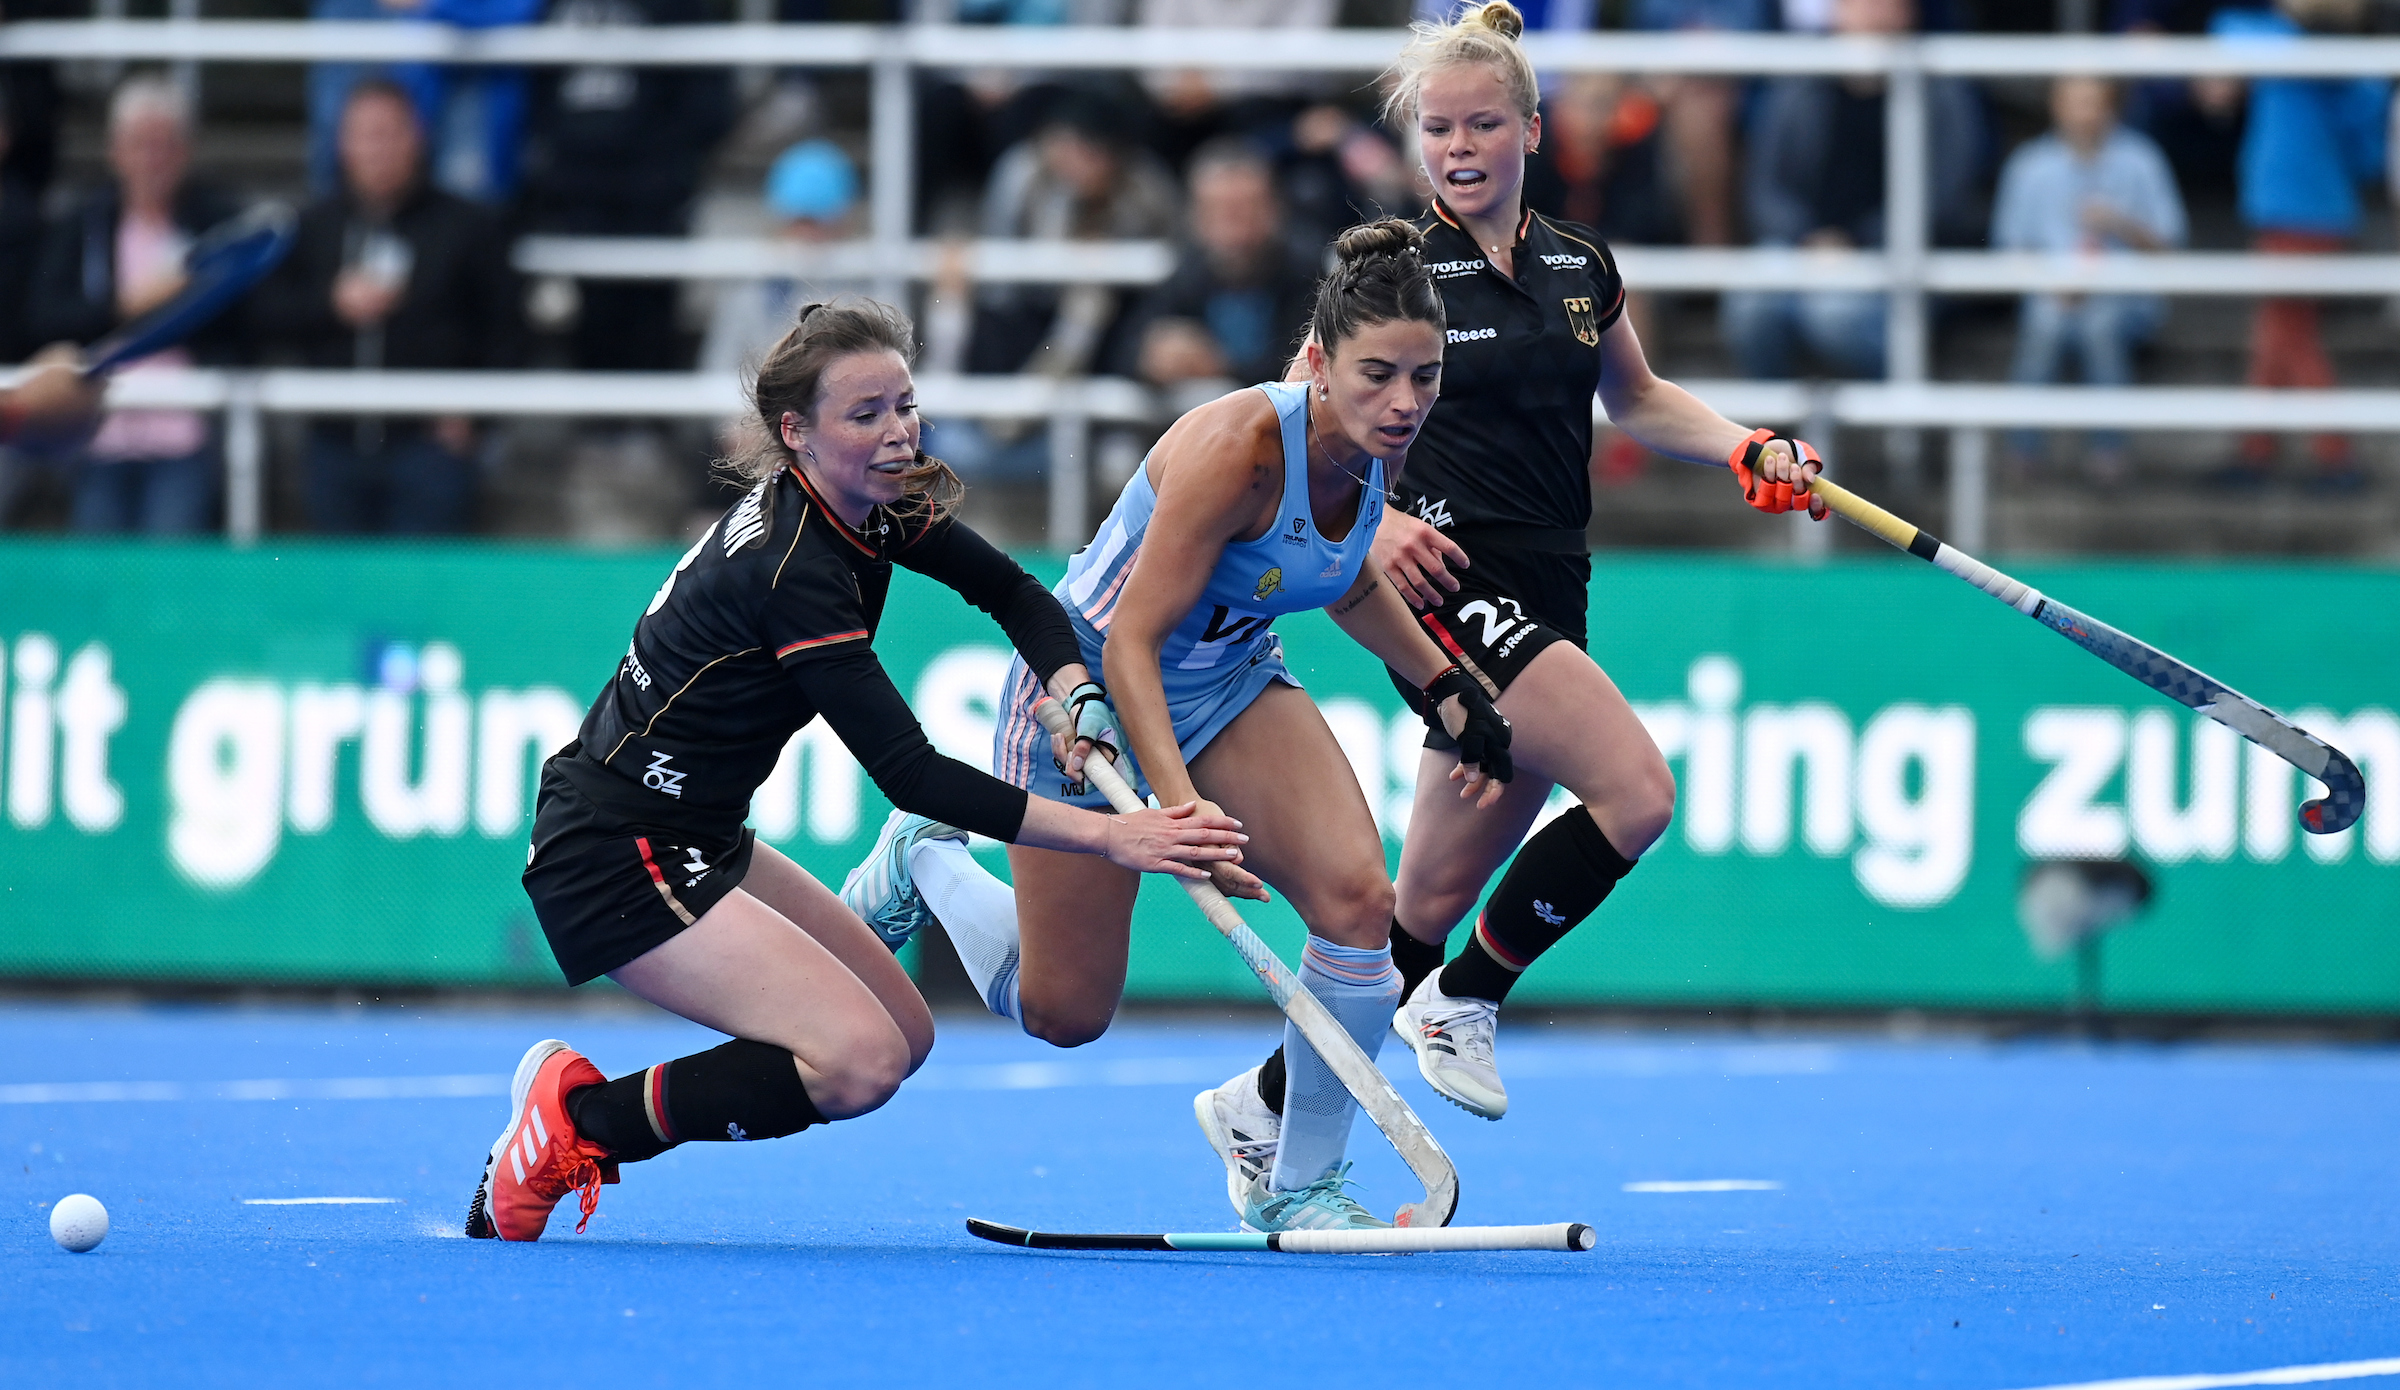 WSP22052216605 - Pro-League: Danas Narrowly Lose to Argentina - In the FIH Pro League today, May 21, the Danas met Argentina. In the first of two games on the Ernst-Reuter-Sportfeld in Berlin, the team of coach Valentin Altenburg had to admit defeat after 60 minutes with 1:2. Viktoria Huse scored the goal for Germany after a penalty corner. Eugenia Trinchinetti and Augustina Gorzelany also scored for Argentina from a penalty corner.